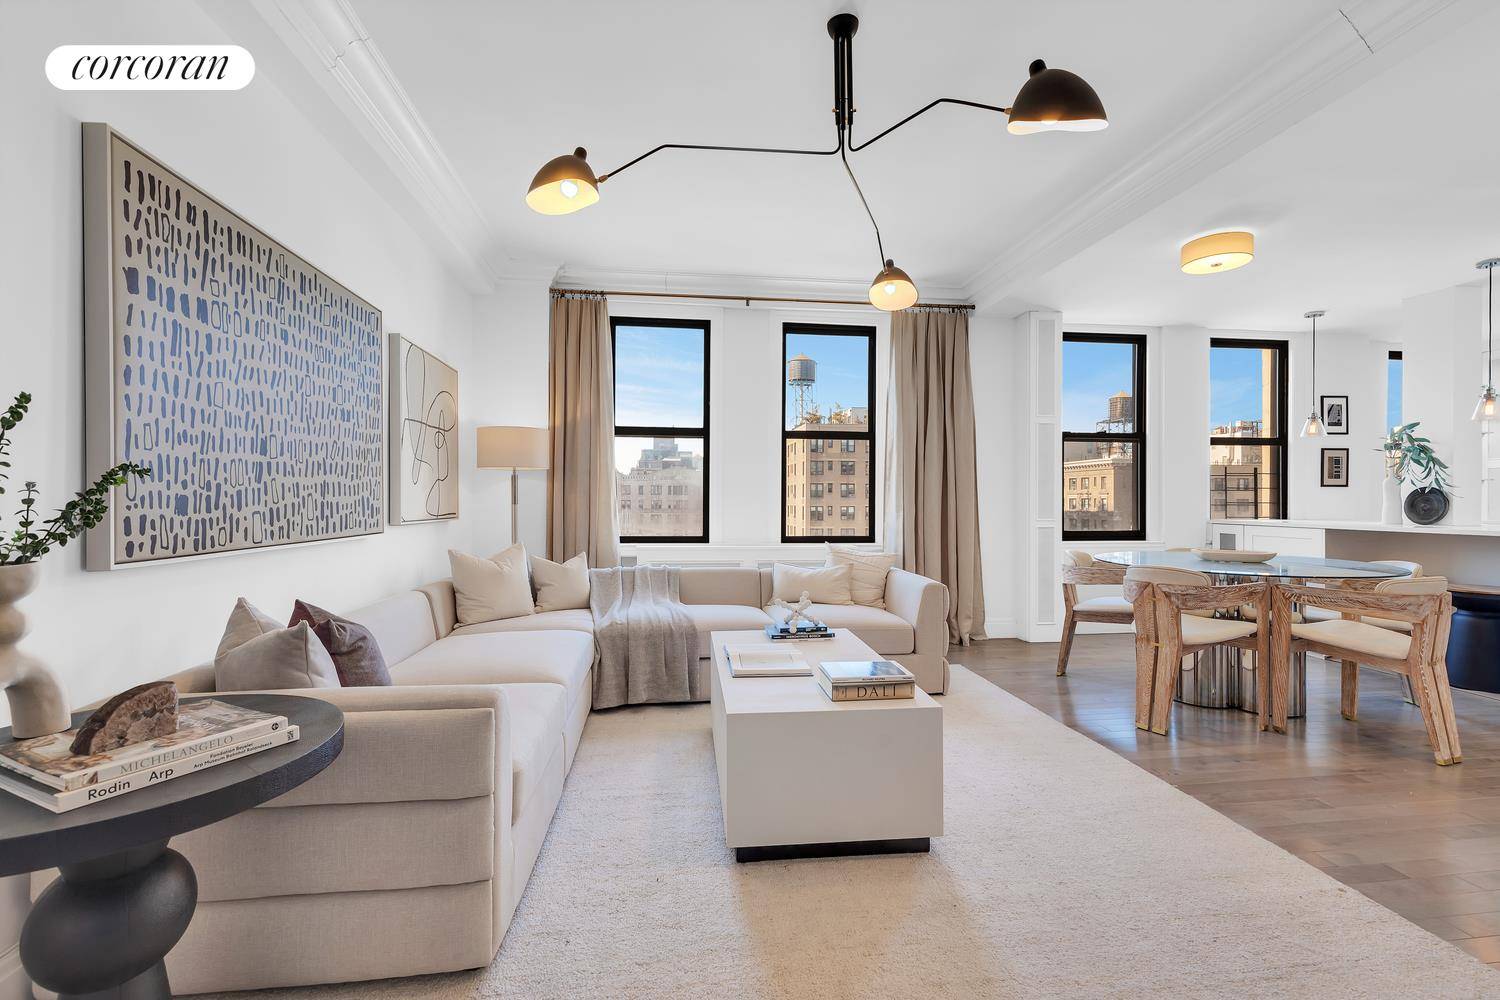 Apt 12F at 221 West 82nd Street is a stunning, triple mint 6 room corner home that was recently completely custom designed utilizing the finest quality materials throughout while preserving ...